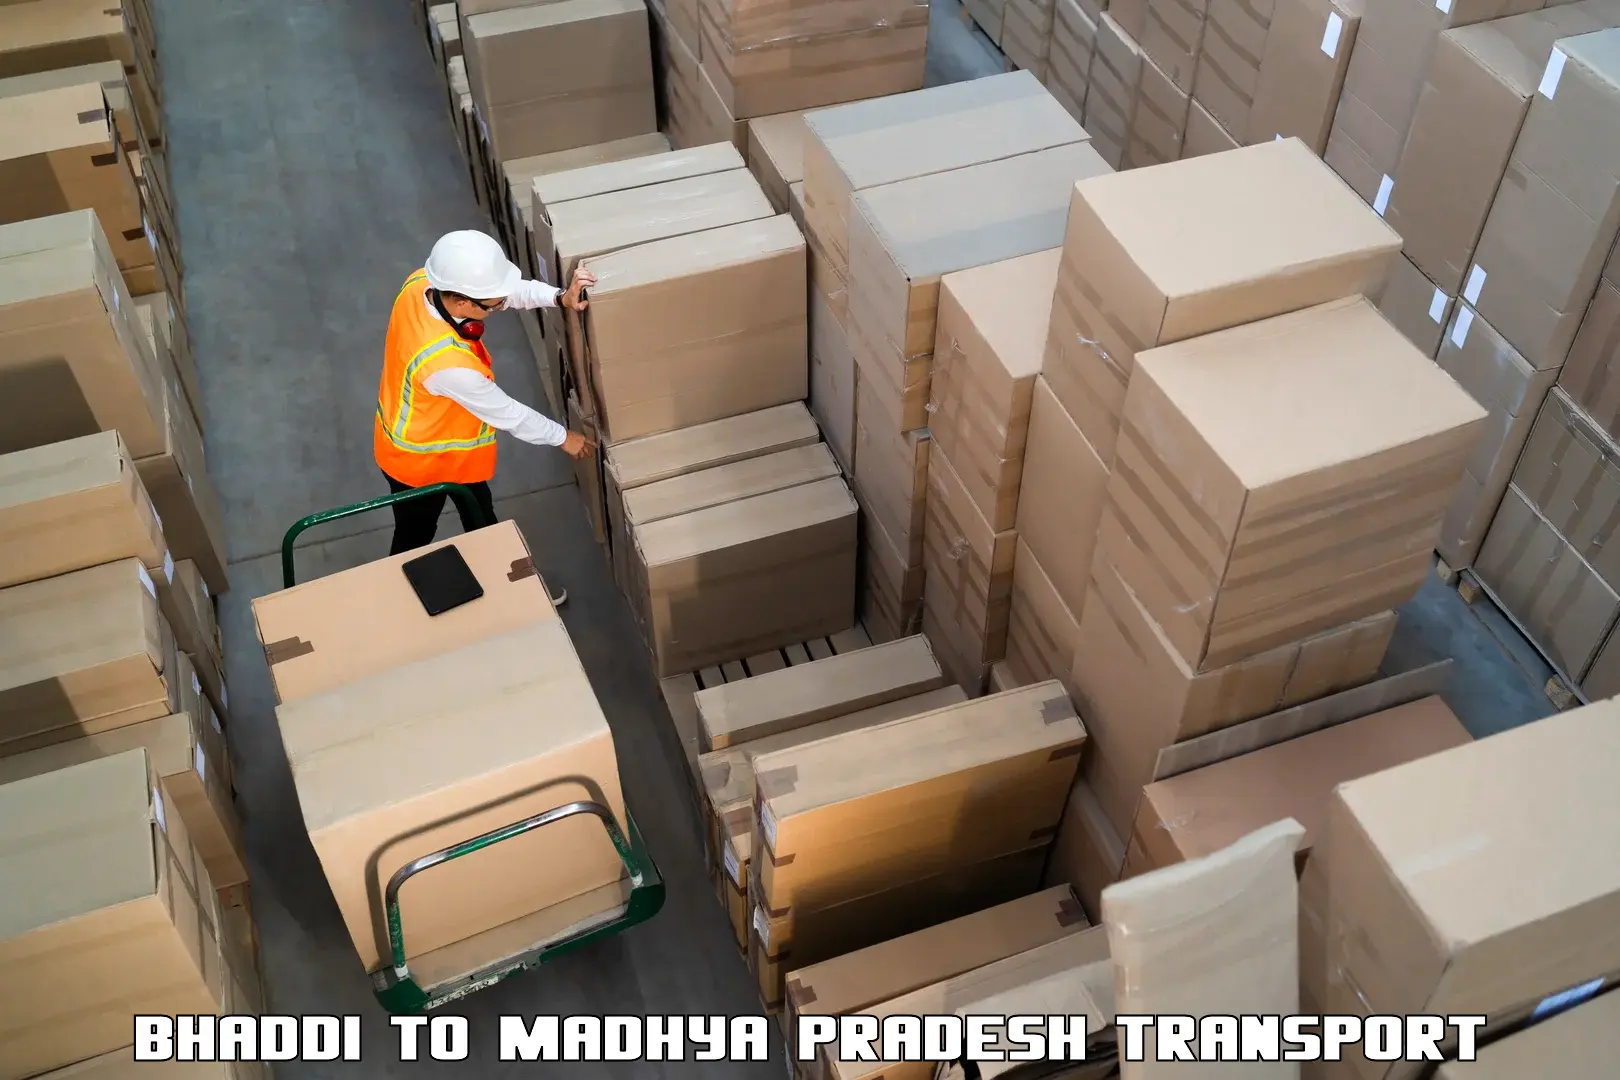 Air freight transport services Bhaddi to Panna